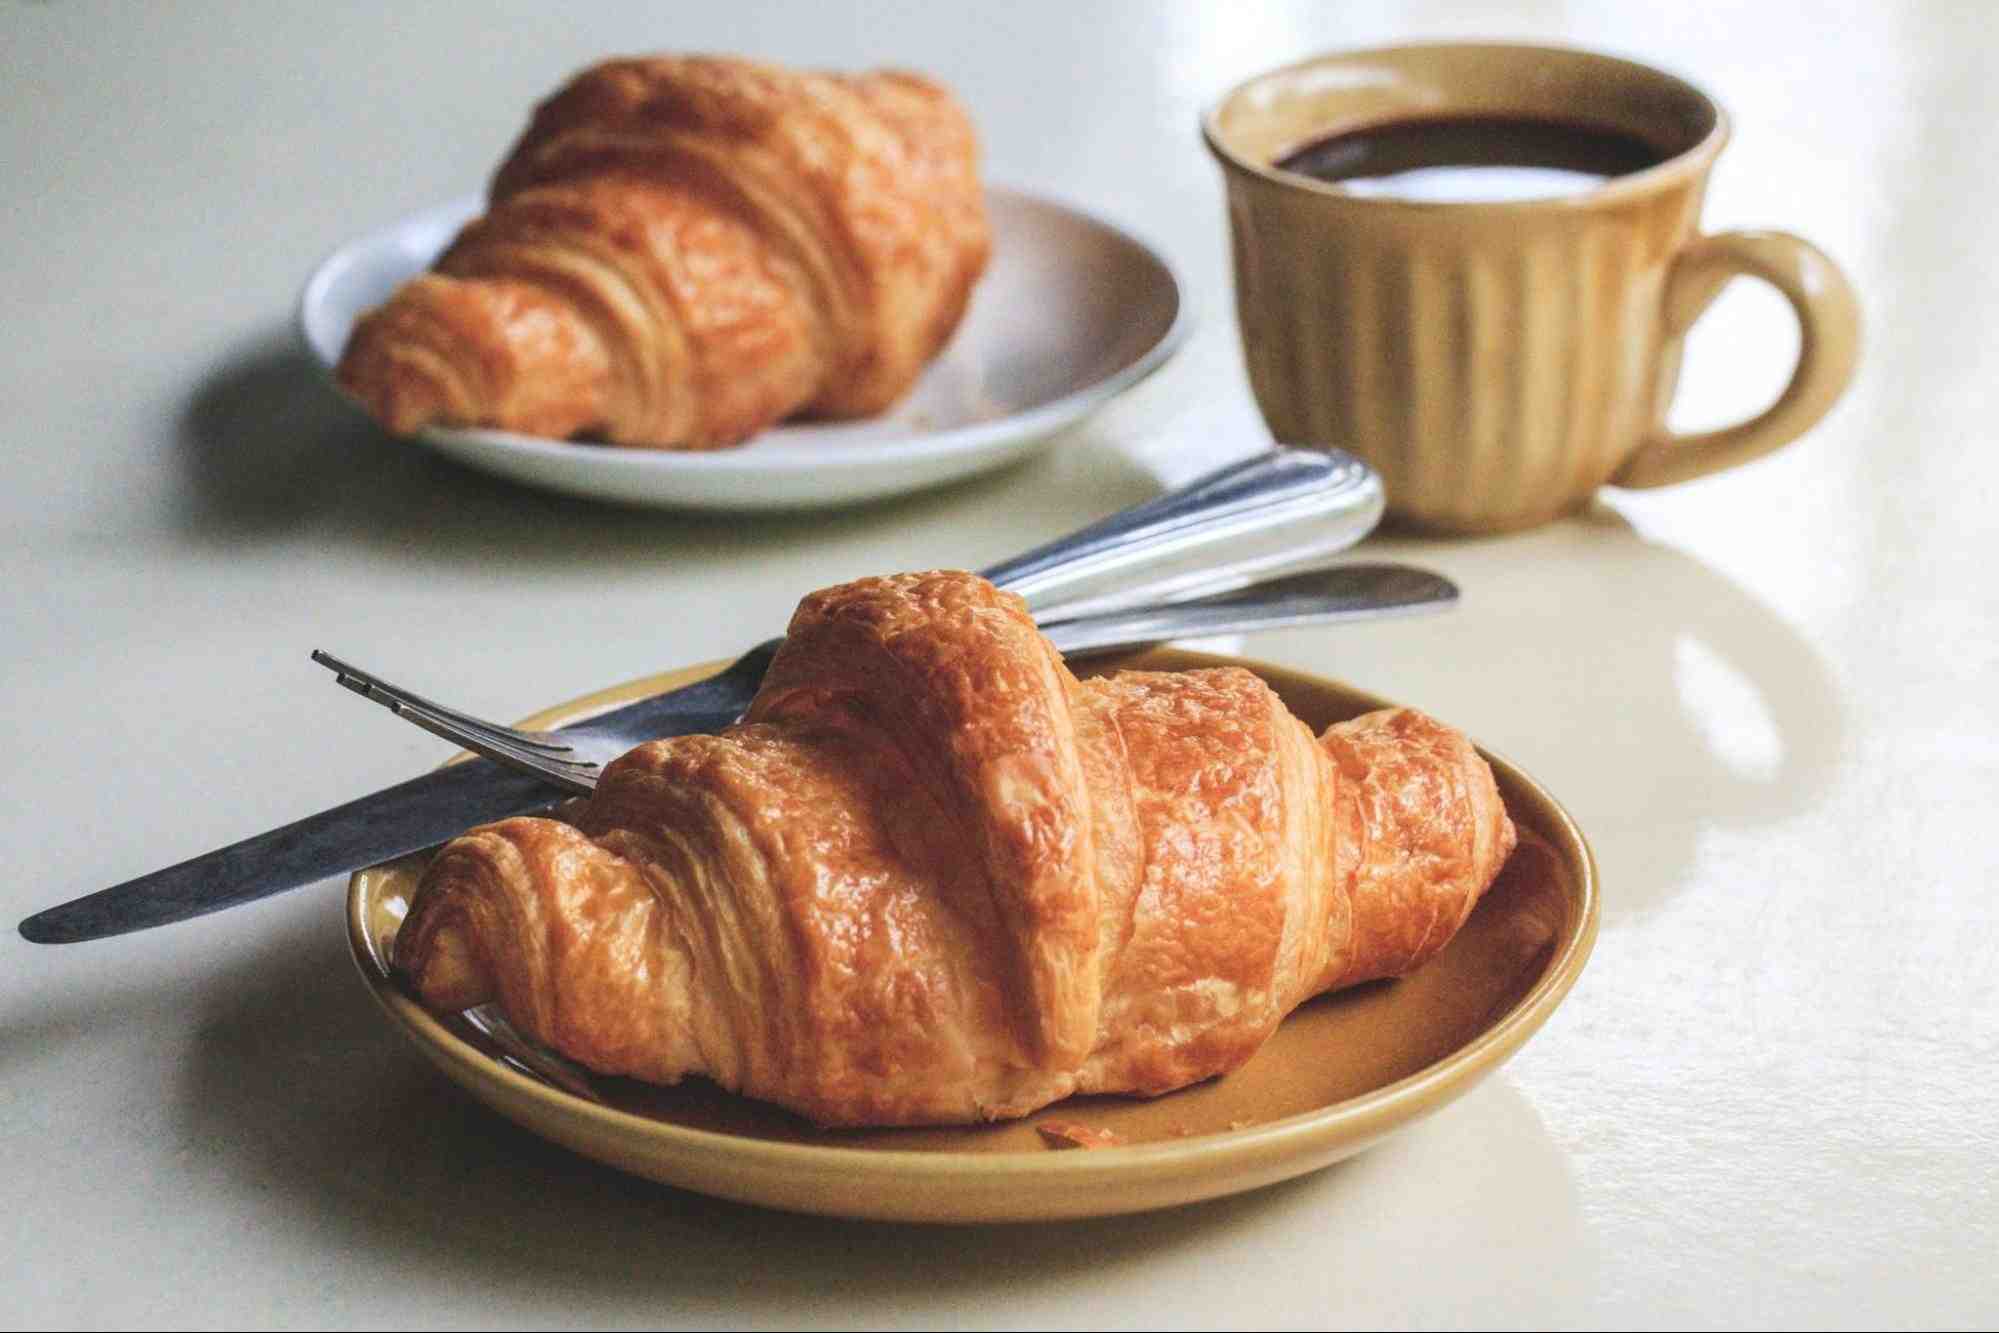 Two small plates of croissants and a cup of black coffee on top of a flat white surface